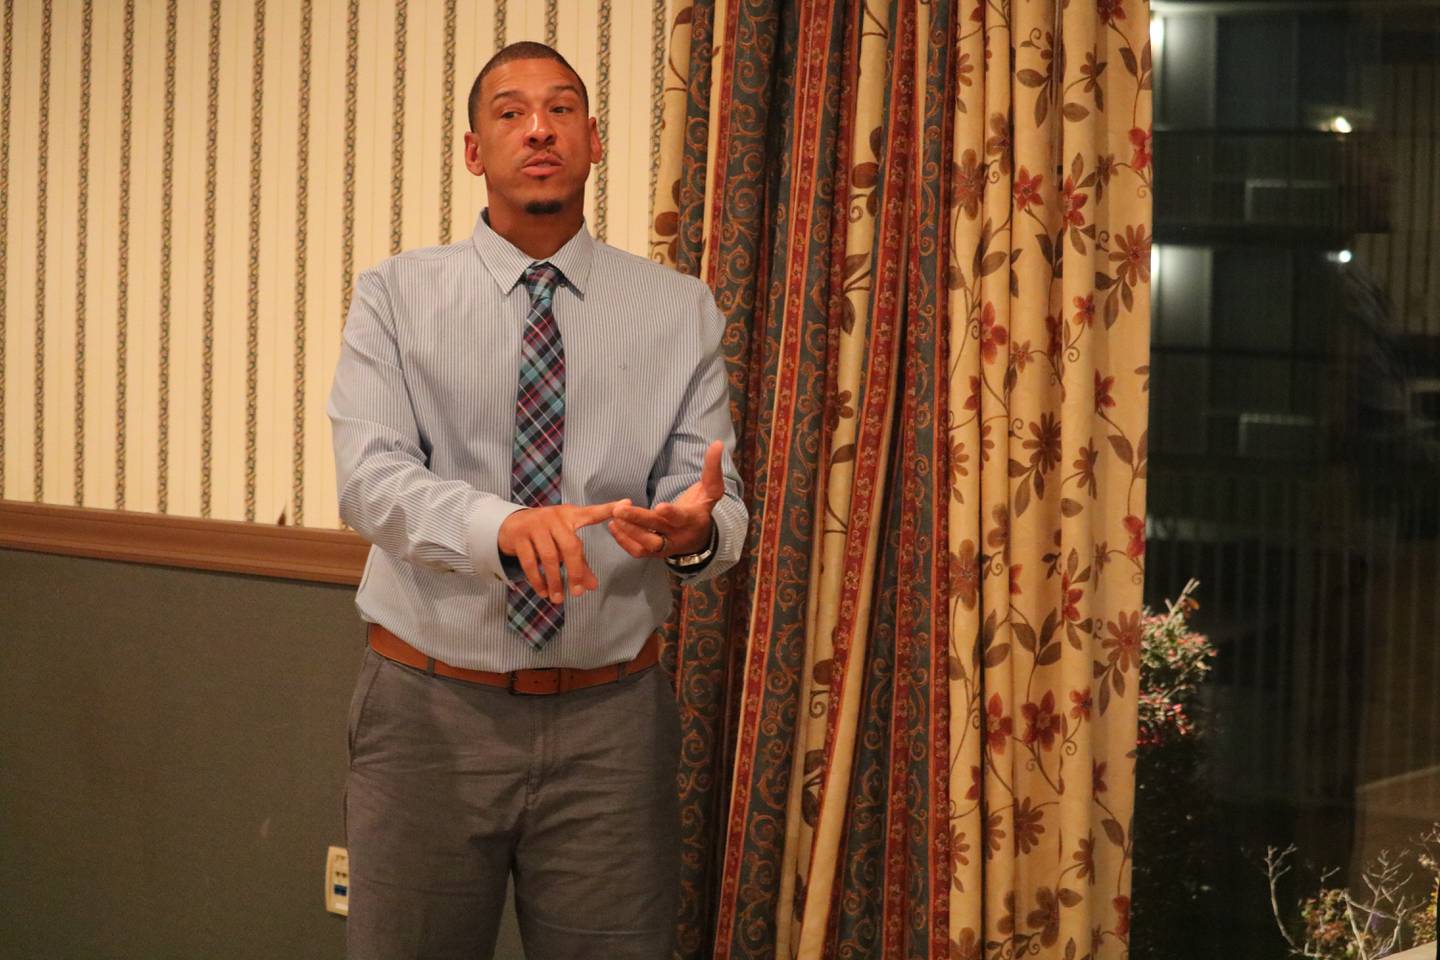 DeKalb Ward 7 aldermanic candidate John Walker speaks Thursday, Oct. 27, 2022 to those on hand for his meet-and-greet held at the Red Roof Inn & Suites in DeKalb.